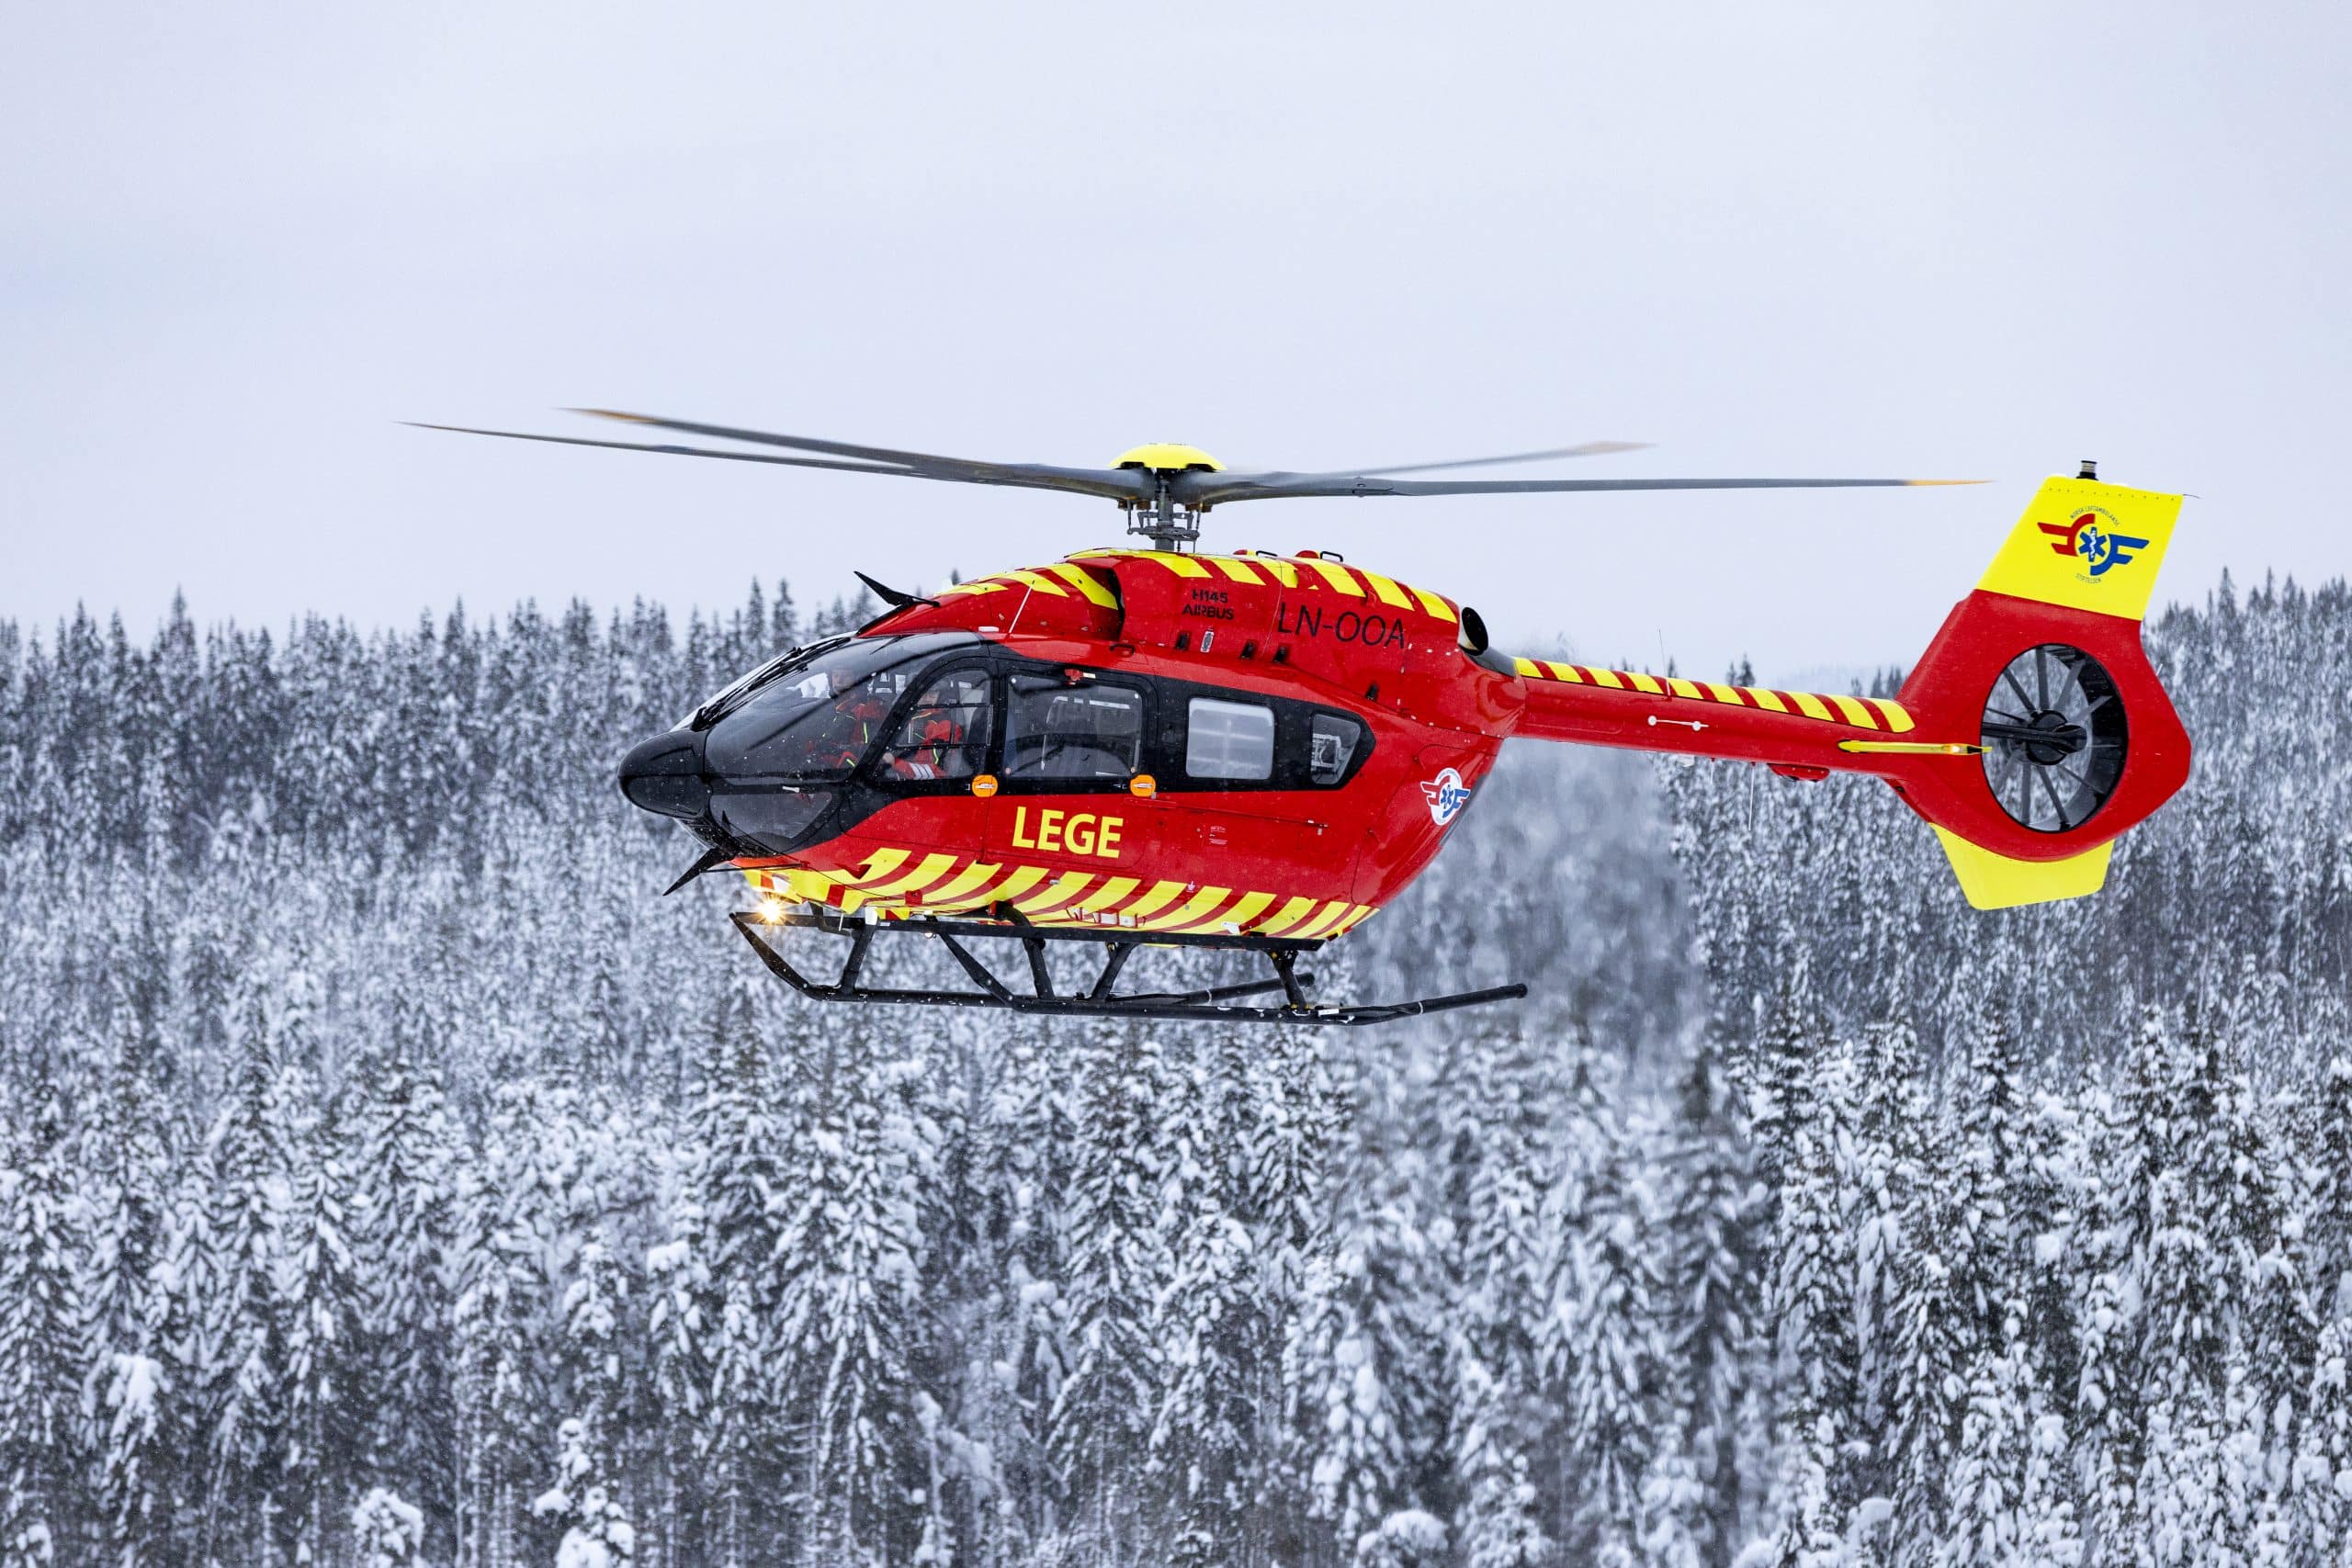 Norwegian Air Ambulance Foundation's development helicopter, an Airbus H145 helicopter used for innovation, research and development to ensure even better solutions in the future.